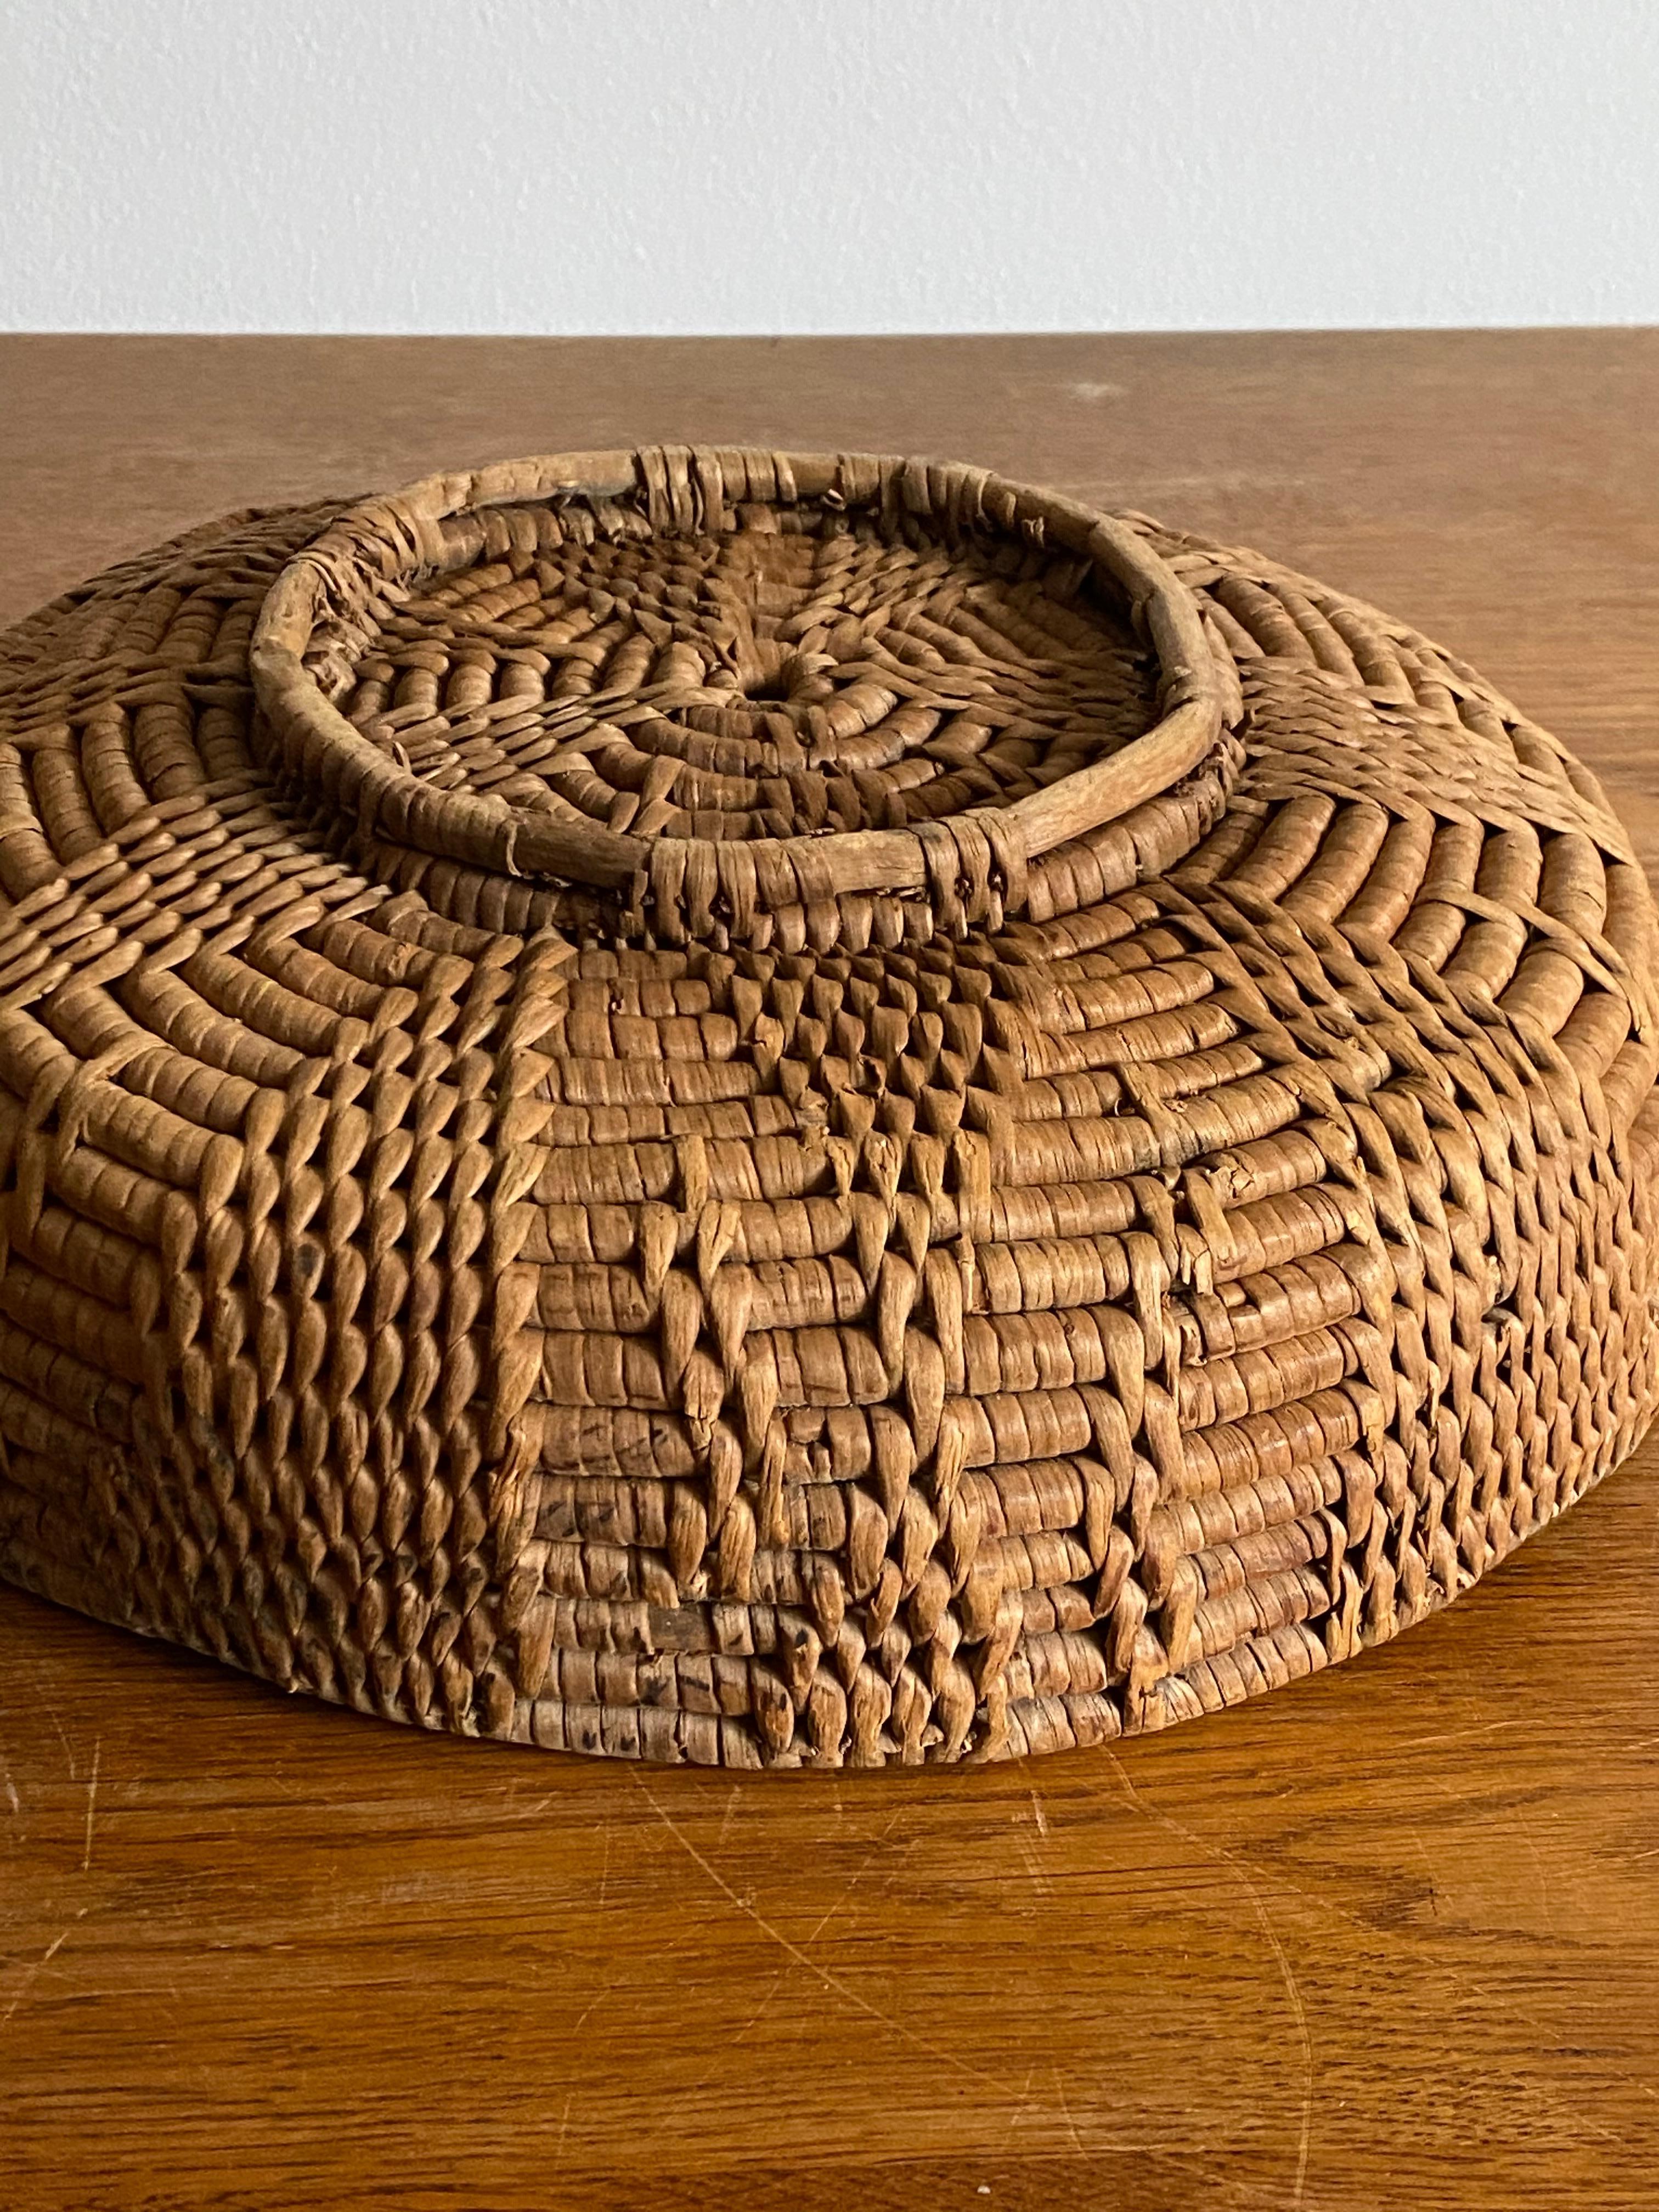 Swedish Craft, Basket or Bowl, Woven Fir Root, Sweden, 19th Century 1